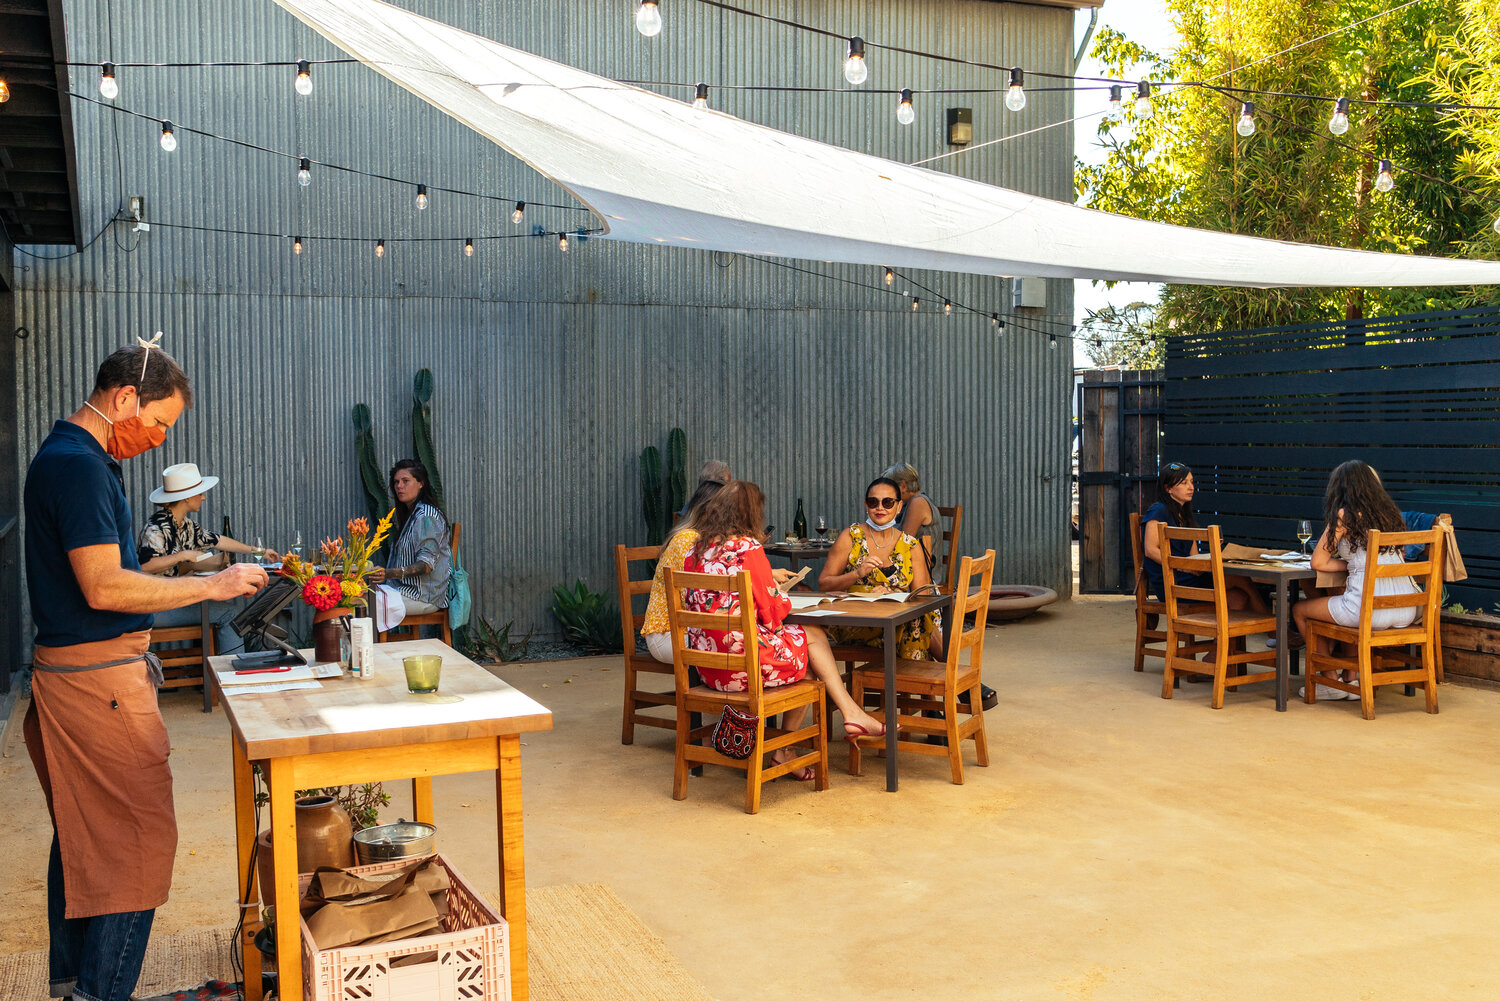 having opened in mid summer \20\20, the back patio served as the primary dining 16